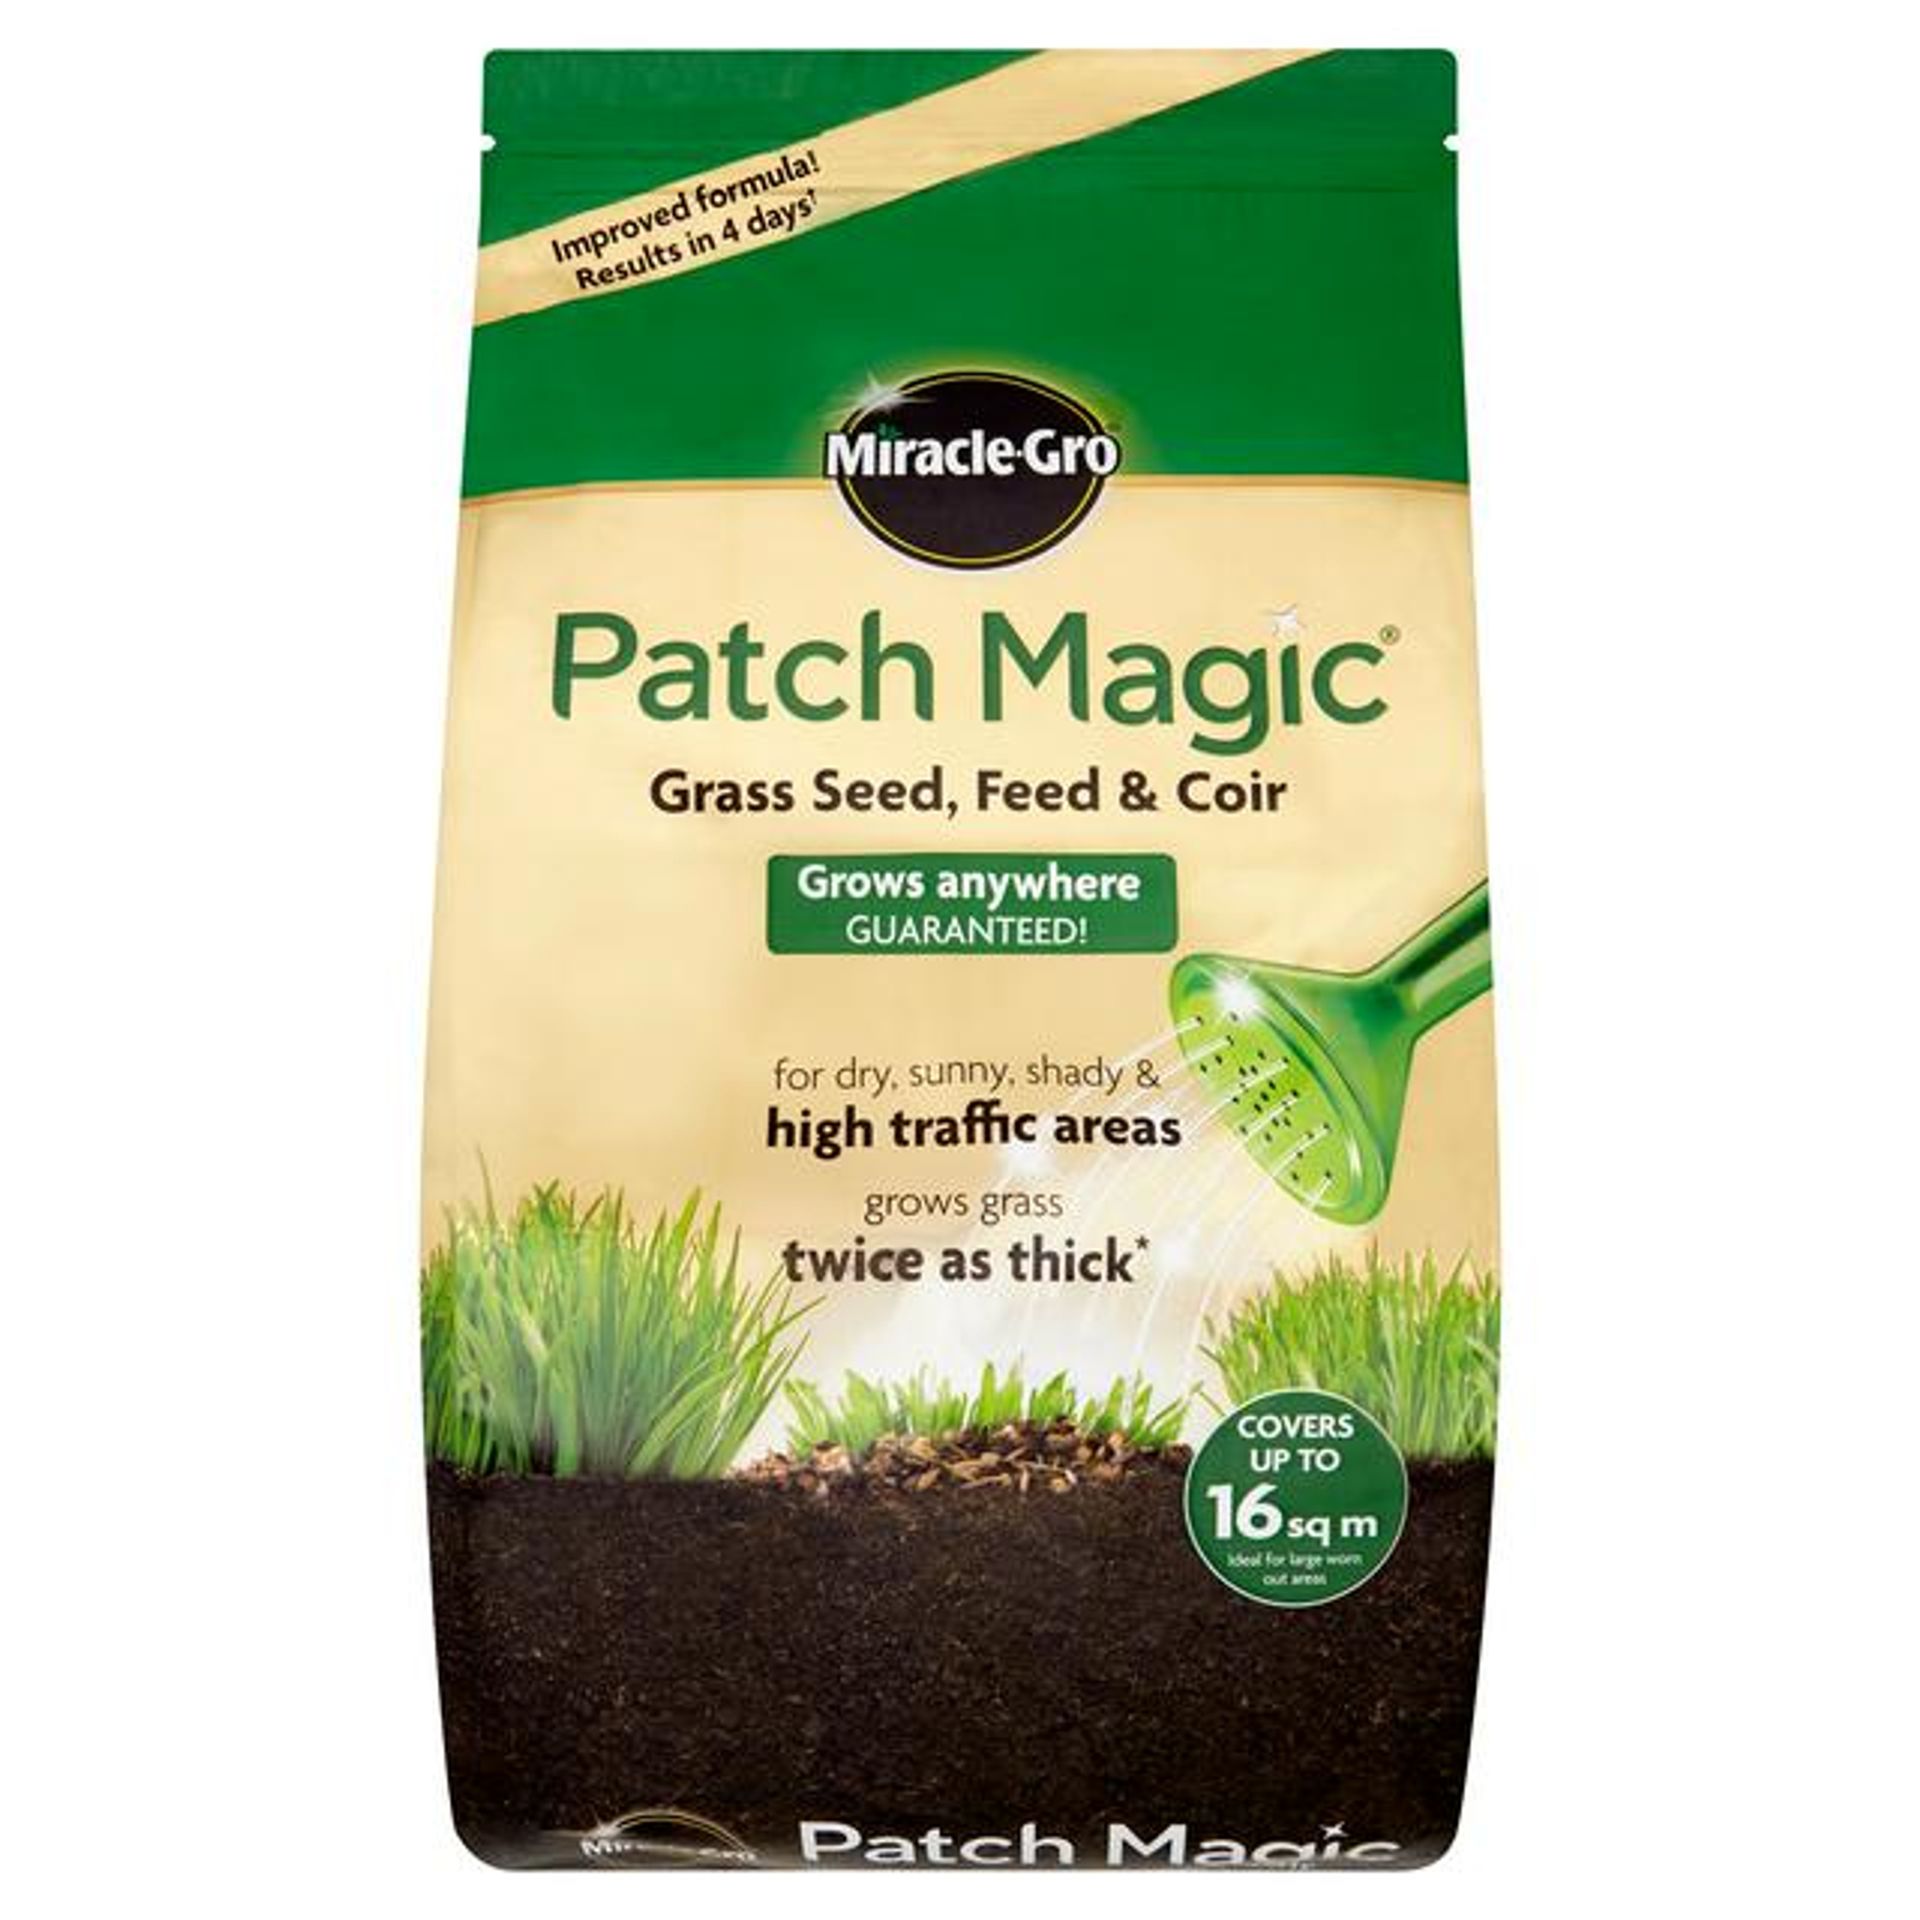 Miracle-Gro Patch Magic Grass Seed, Feed and Coir Bag